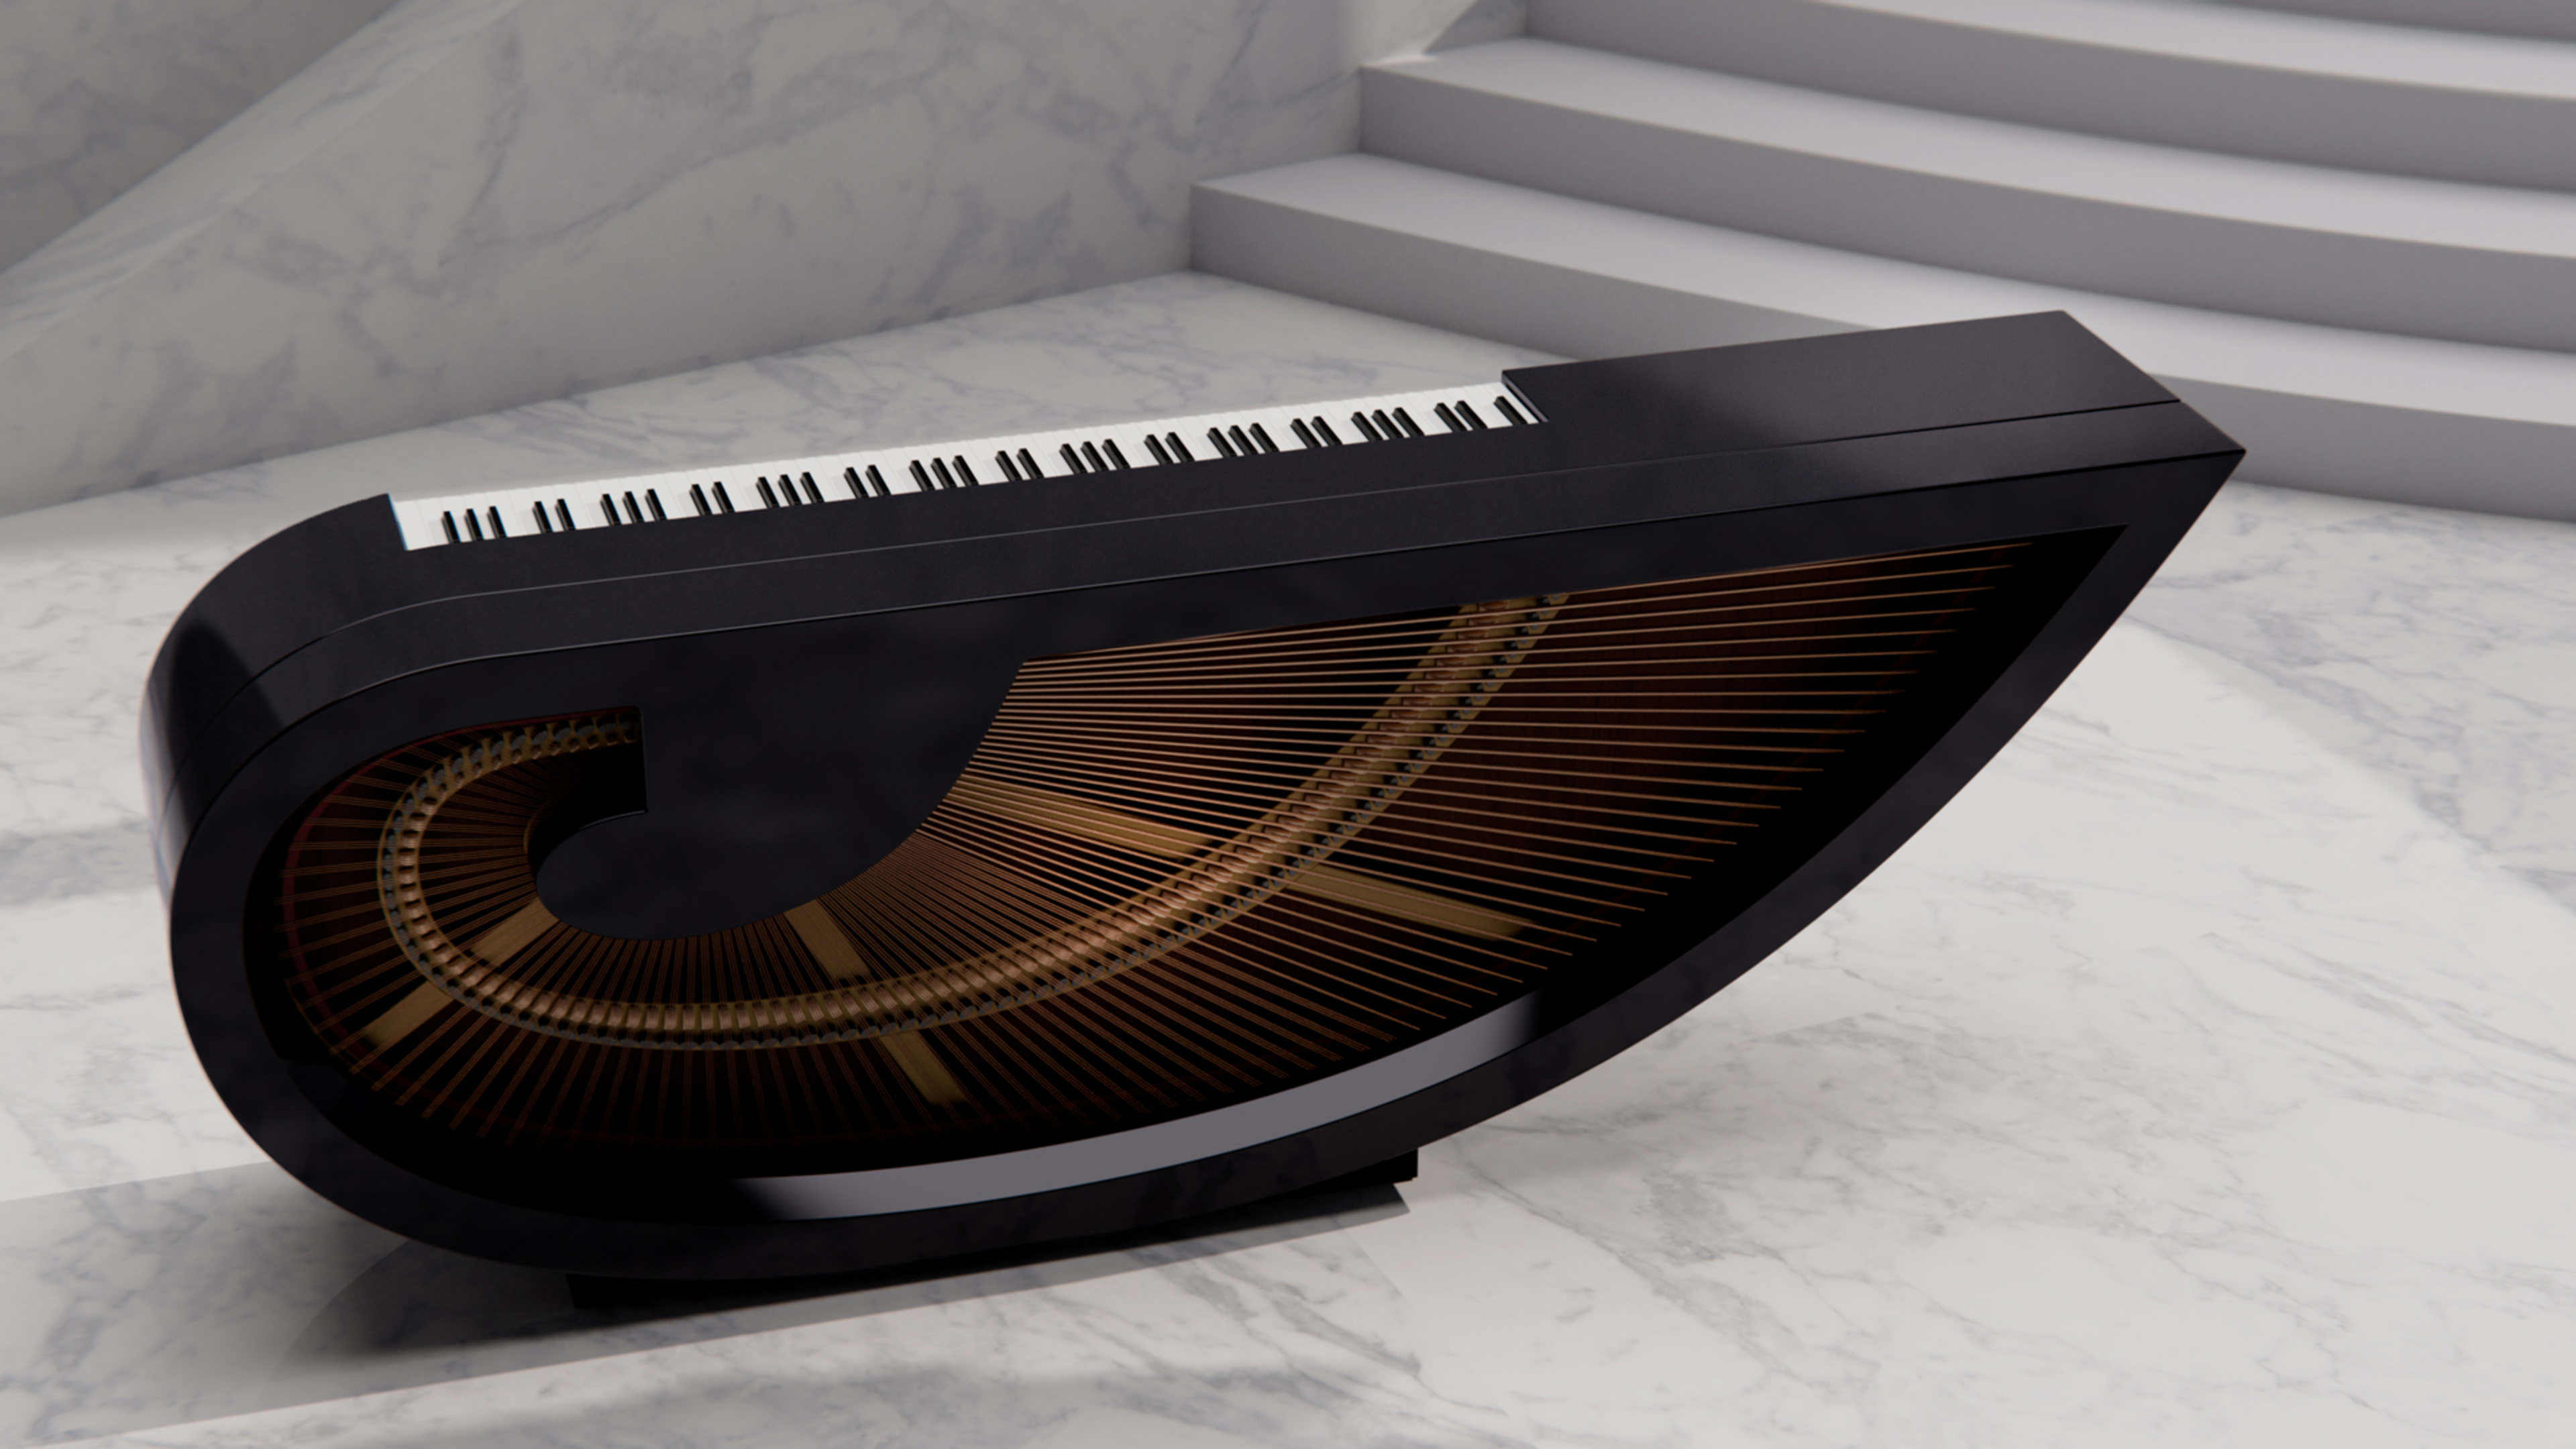 This wing-shaped instrument is a redesigned baby grand piano